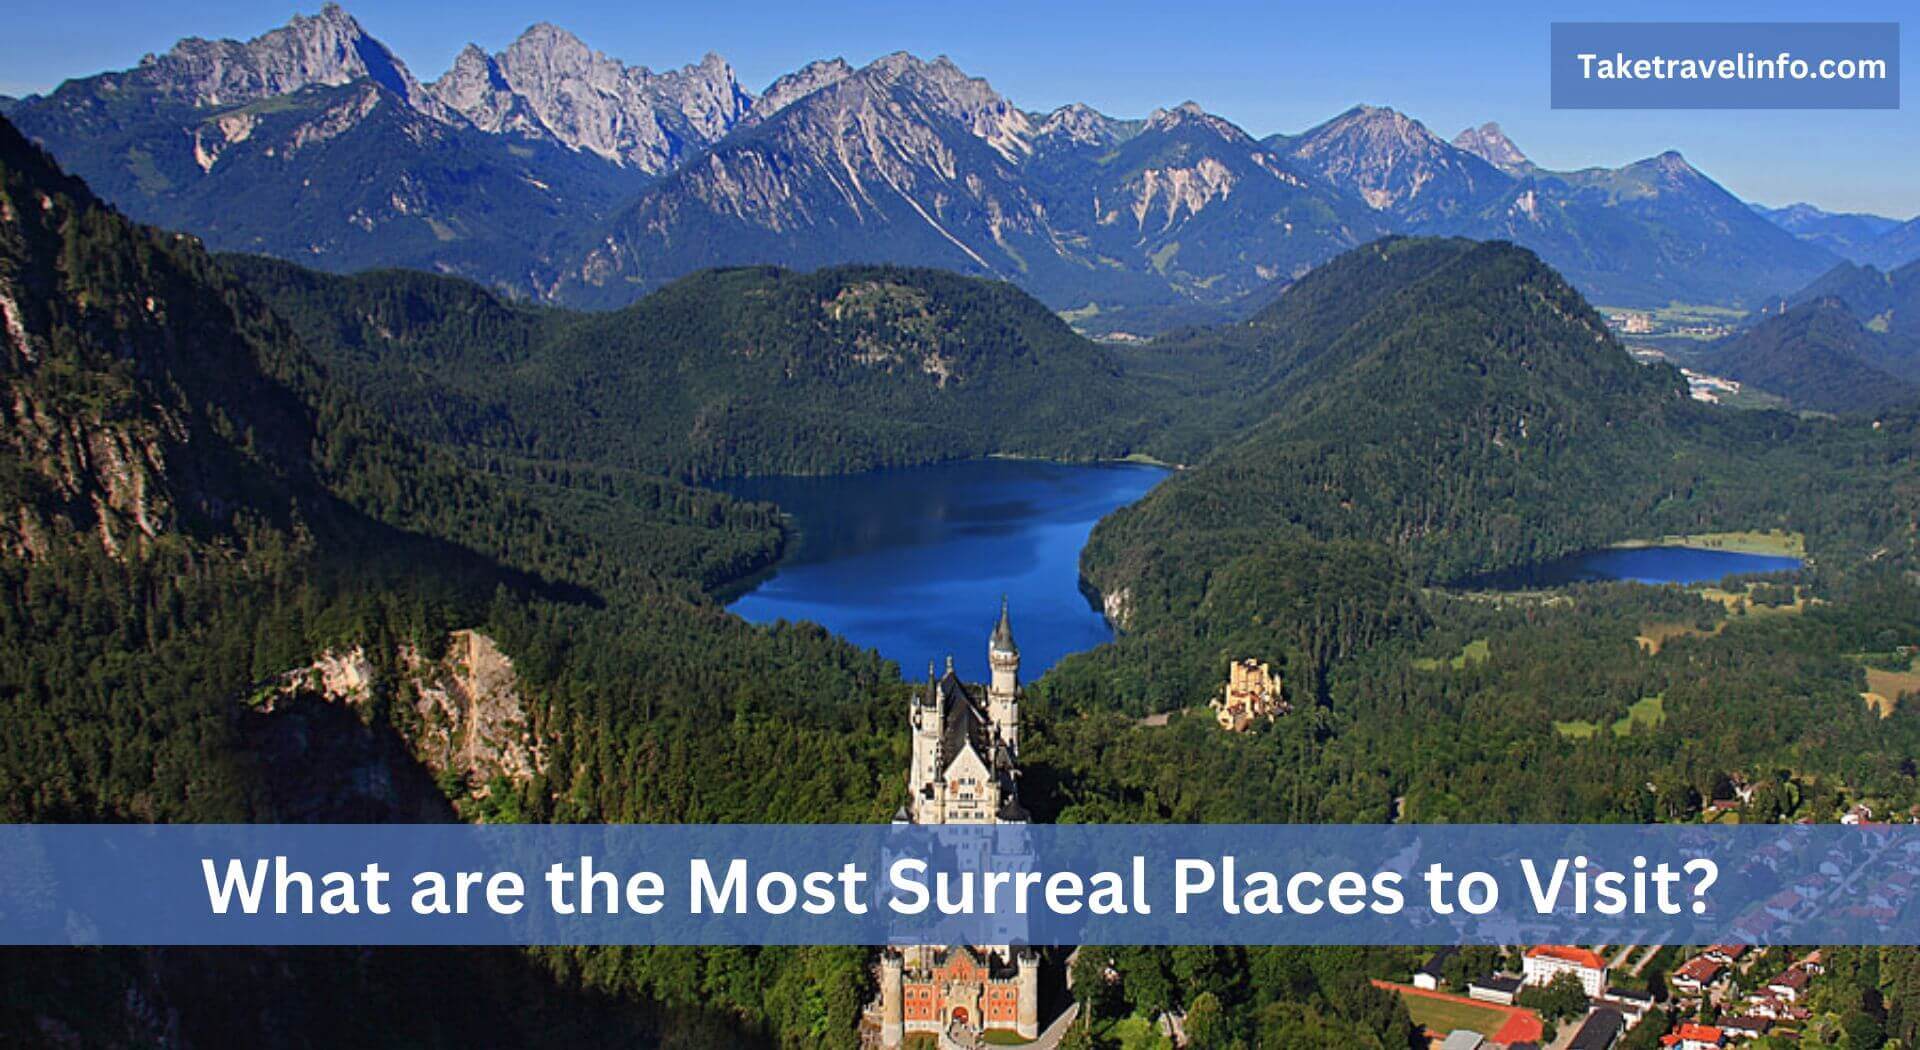 What are the Most Surreal Places to Visit?